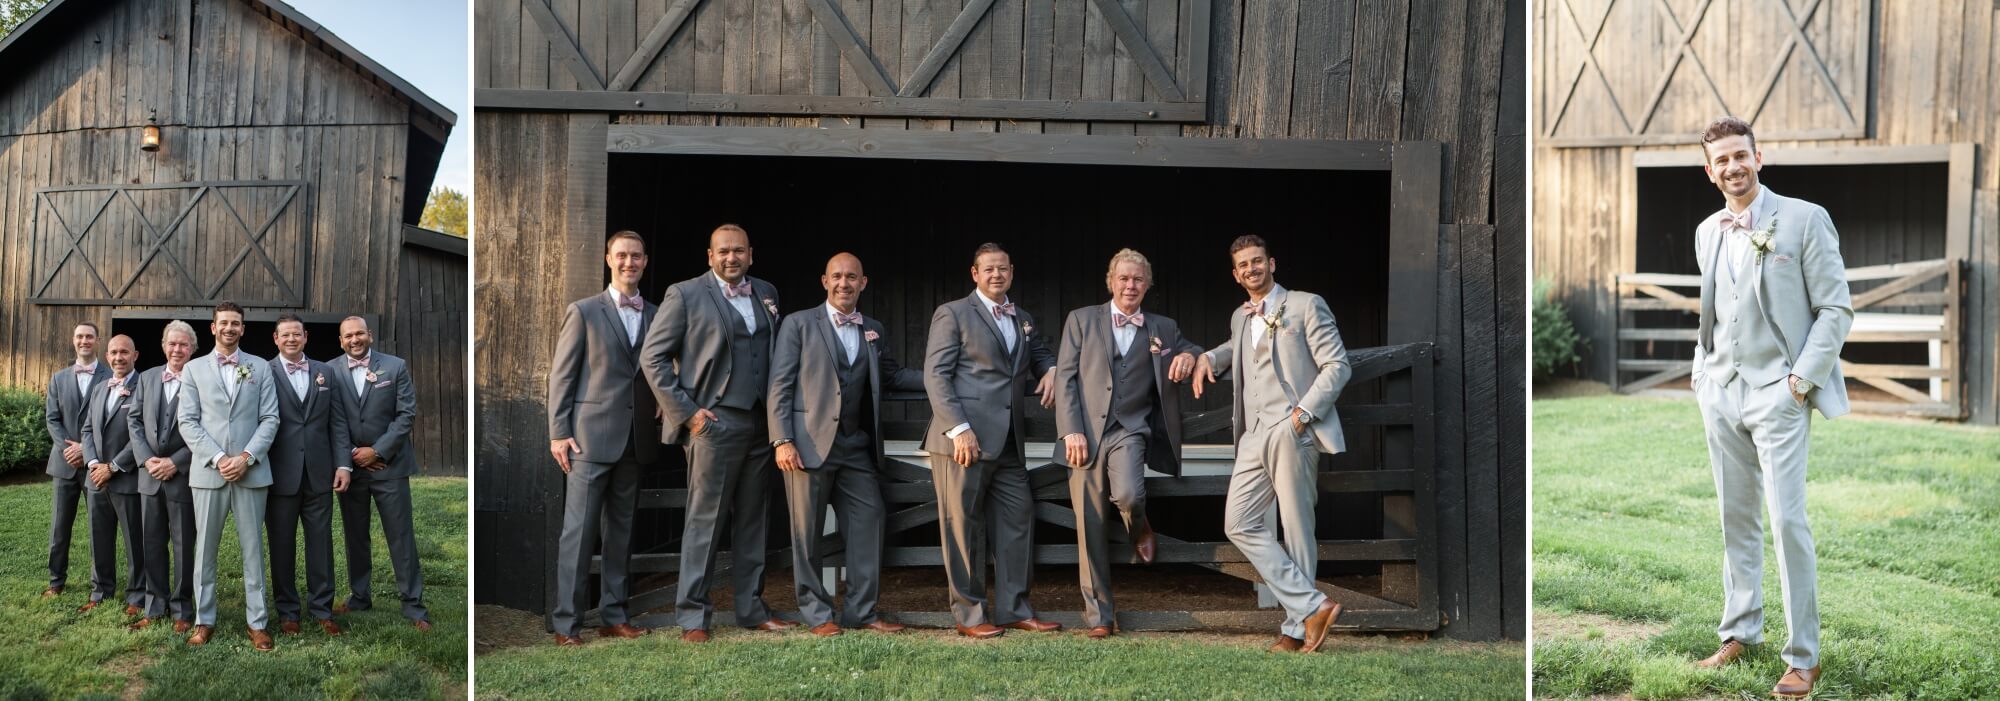 Groom and groomsmen before wedding ceremony at David and Jennifer's Cedarwood spring wedding in Nashville TN, photography by Krista Lee. 